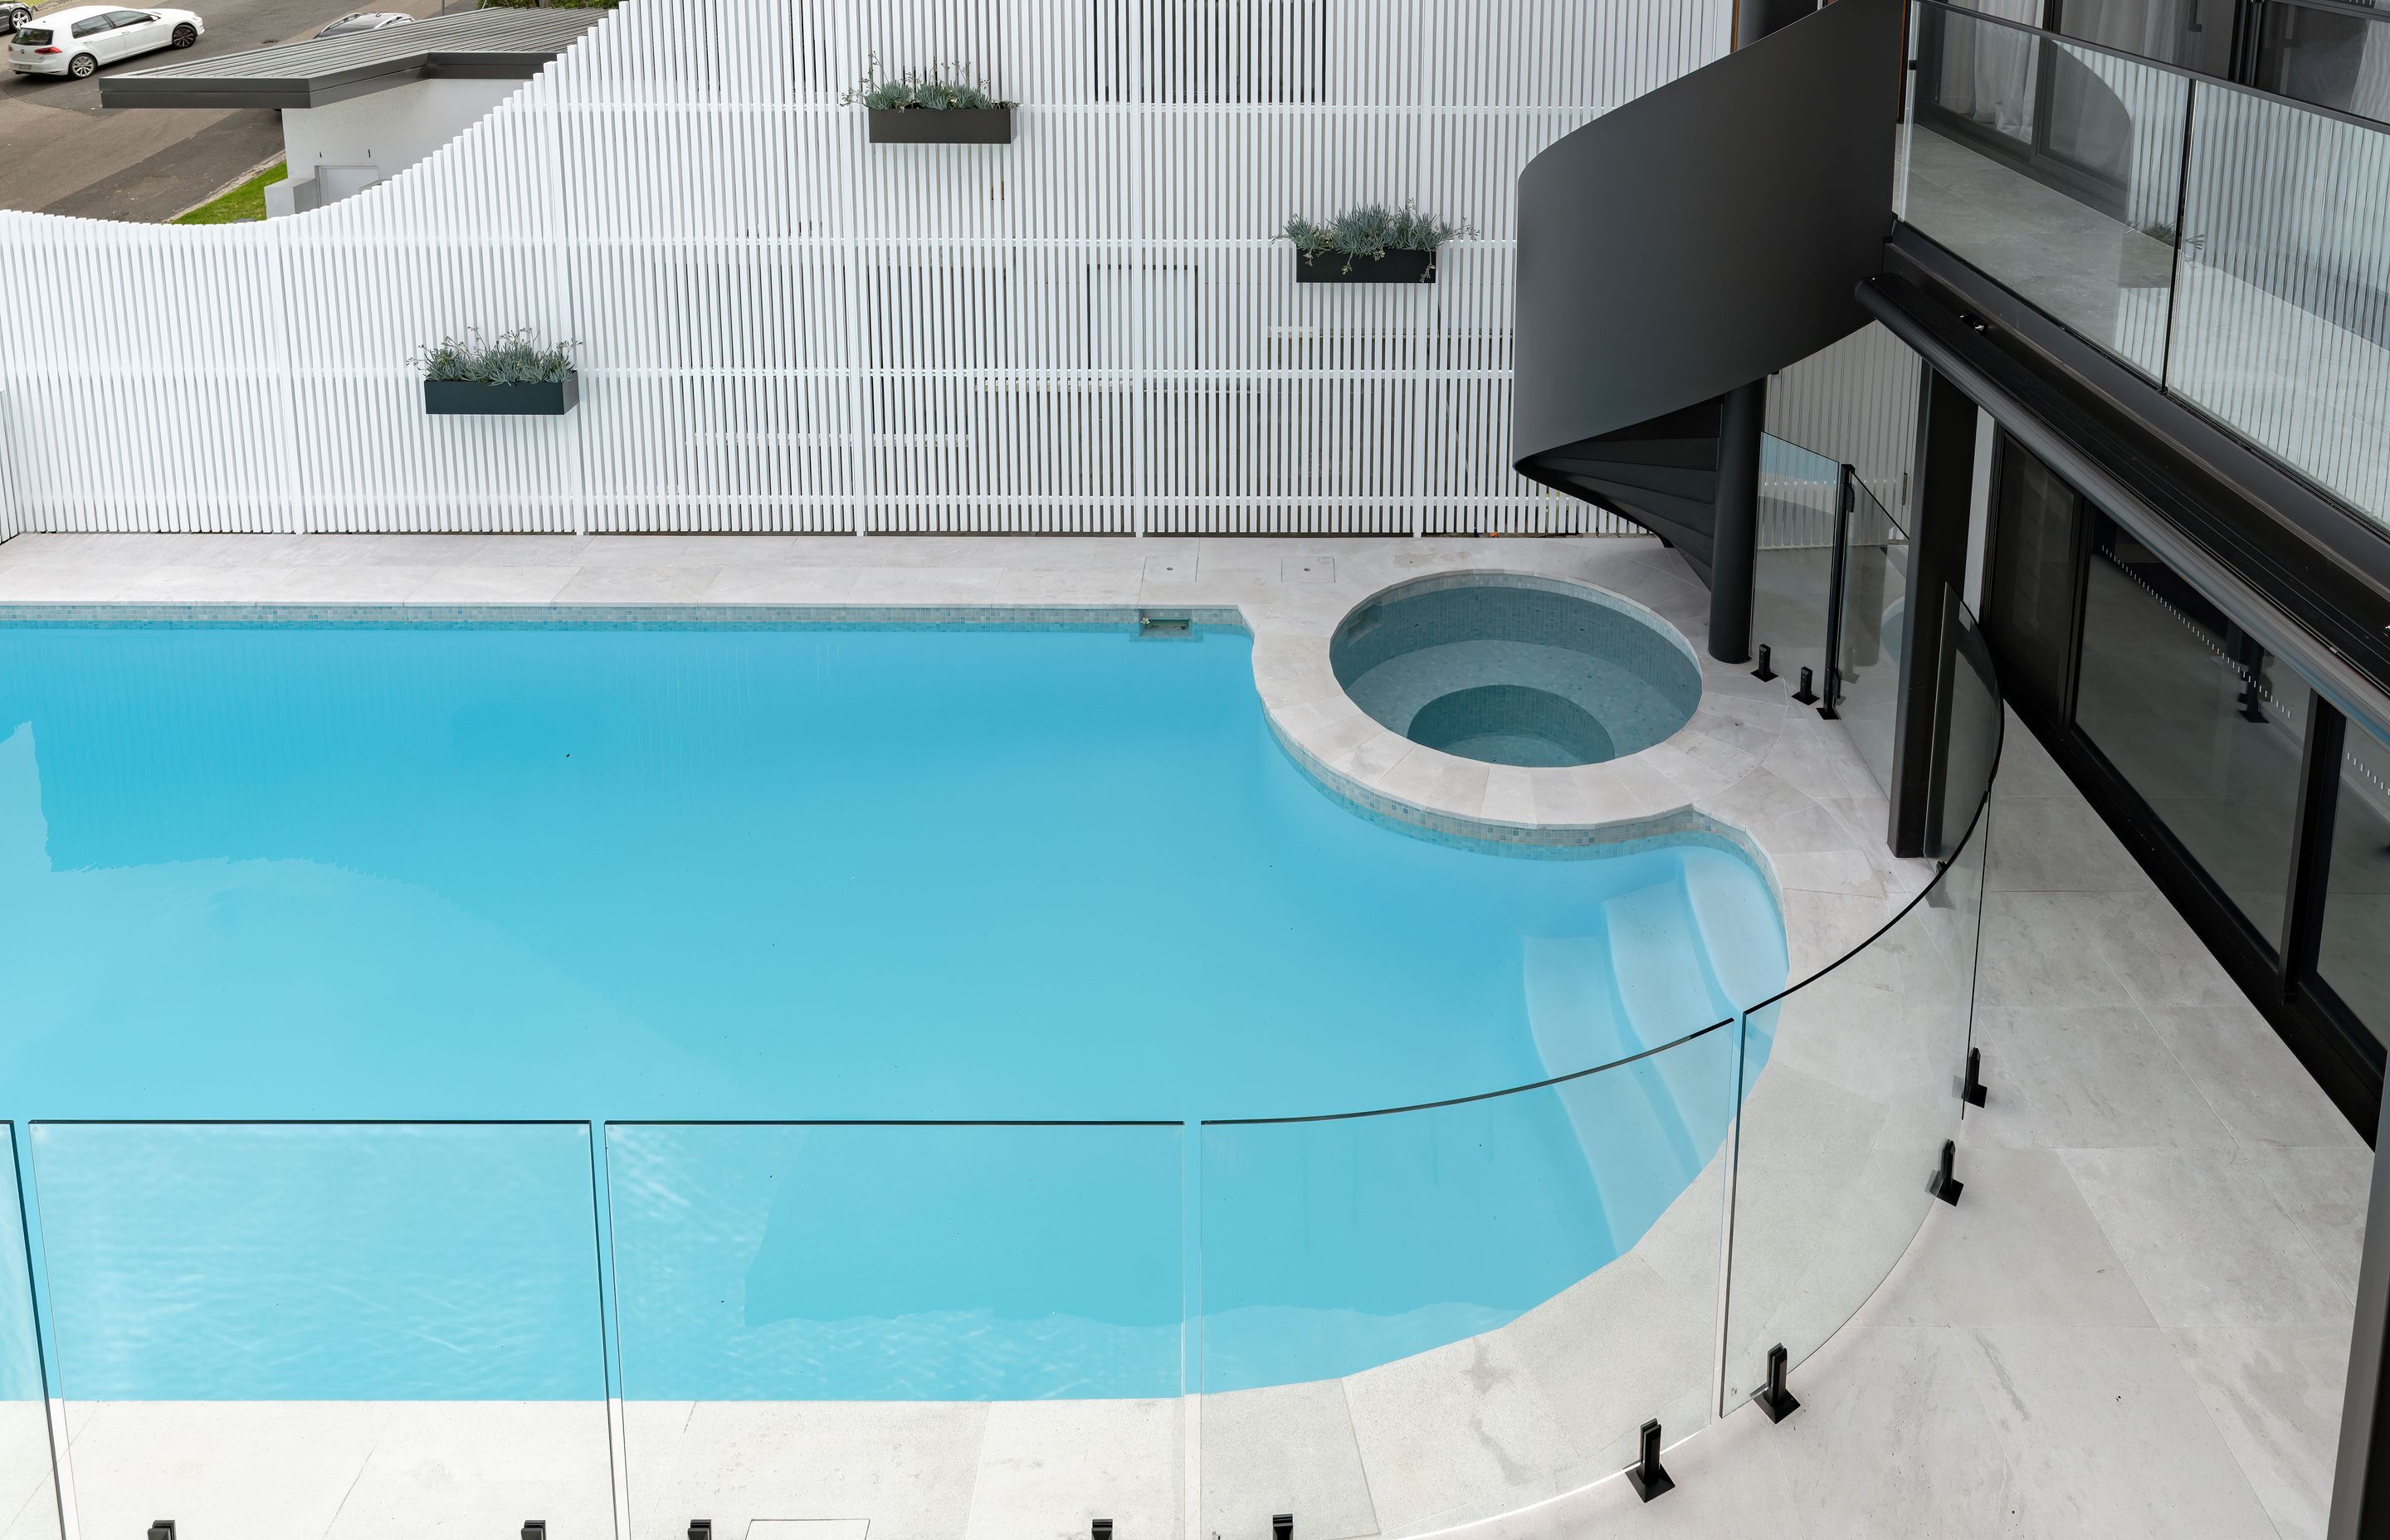 Bespoke glazed panels were created by Glazed Co to reflect the curves of the pool.